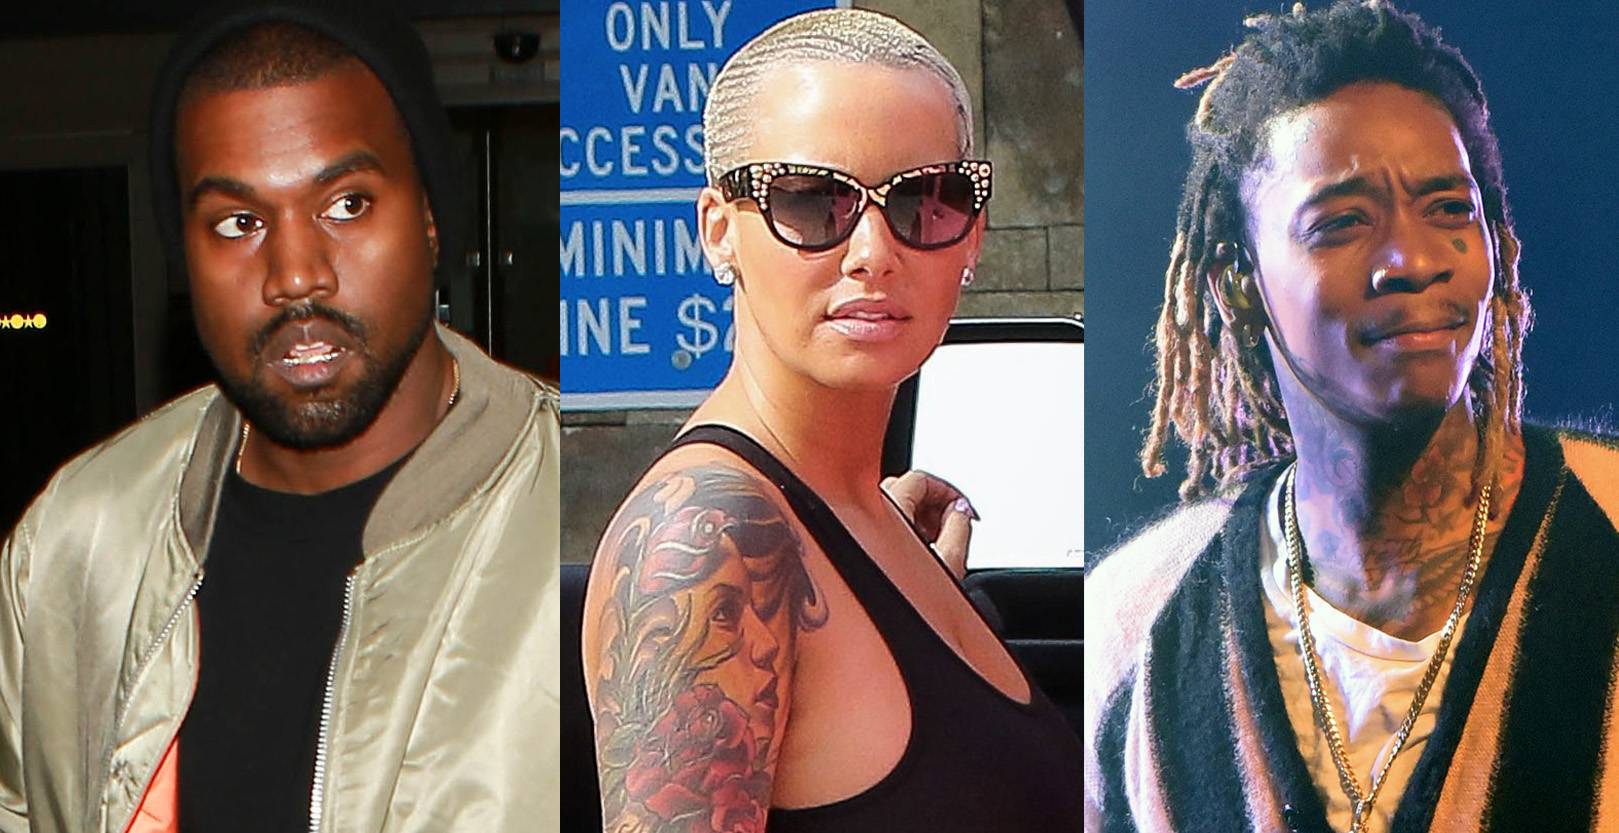 Kanye West / Amber Rose / Wiz Khalifa - All it takes is a smooth misunderstanding to set Kanye West off. Twitter, oh Twitter, you never fail to deliver. “Hit this KK and become yourself,” was the Wiz Khalifa tweet that set Mr. West over the edge. Thinking it was about Kim Kardashian, Kanye responded with a now deleted, “Like, oh that’s Ye and I can put his wife’s initials on my Twitter.” Leading to chronological tweets with No. 4 being, “4th you let a stripper trap you.” It wasn’t long before Muva Amber Rose clapped back with, “Awww @kanyewest are you mad I’m not around to play in you’re [sic] a**hole anymore? #FingersInTheBootyA**B****.” See where assumptions get you?While Kanye keeps tweeting and deleting, check out a few more occasions when current loves and exes were dragged into hip hop beefs and tensions.&nbsp;—Michael Harris and&nbsp;Naima Moore-Turner(Photos from left: GVK/Bauer-Griffin/GC Images, C Flanigan/Getty Images)